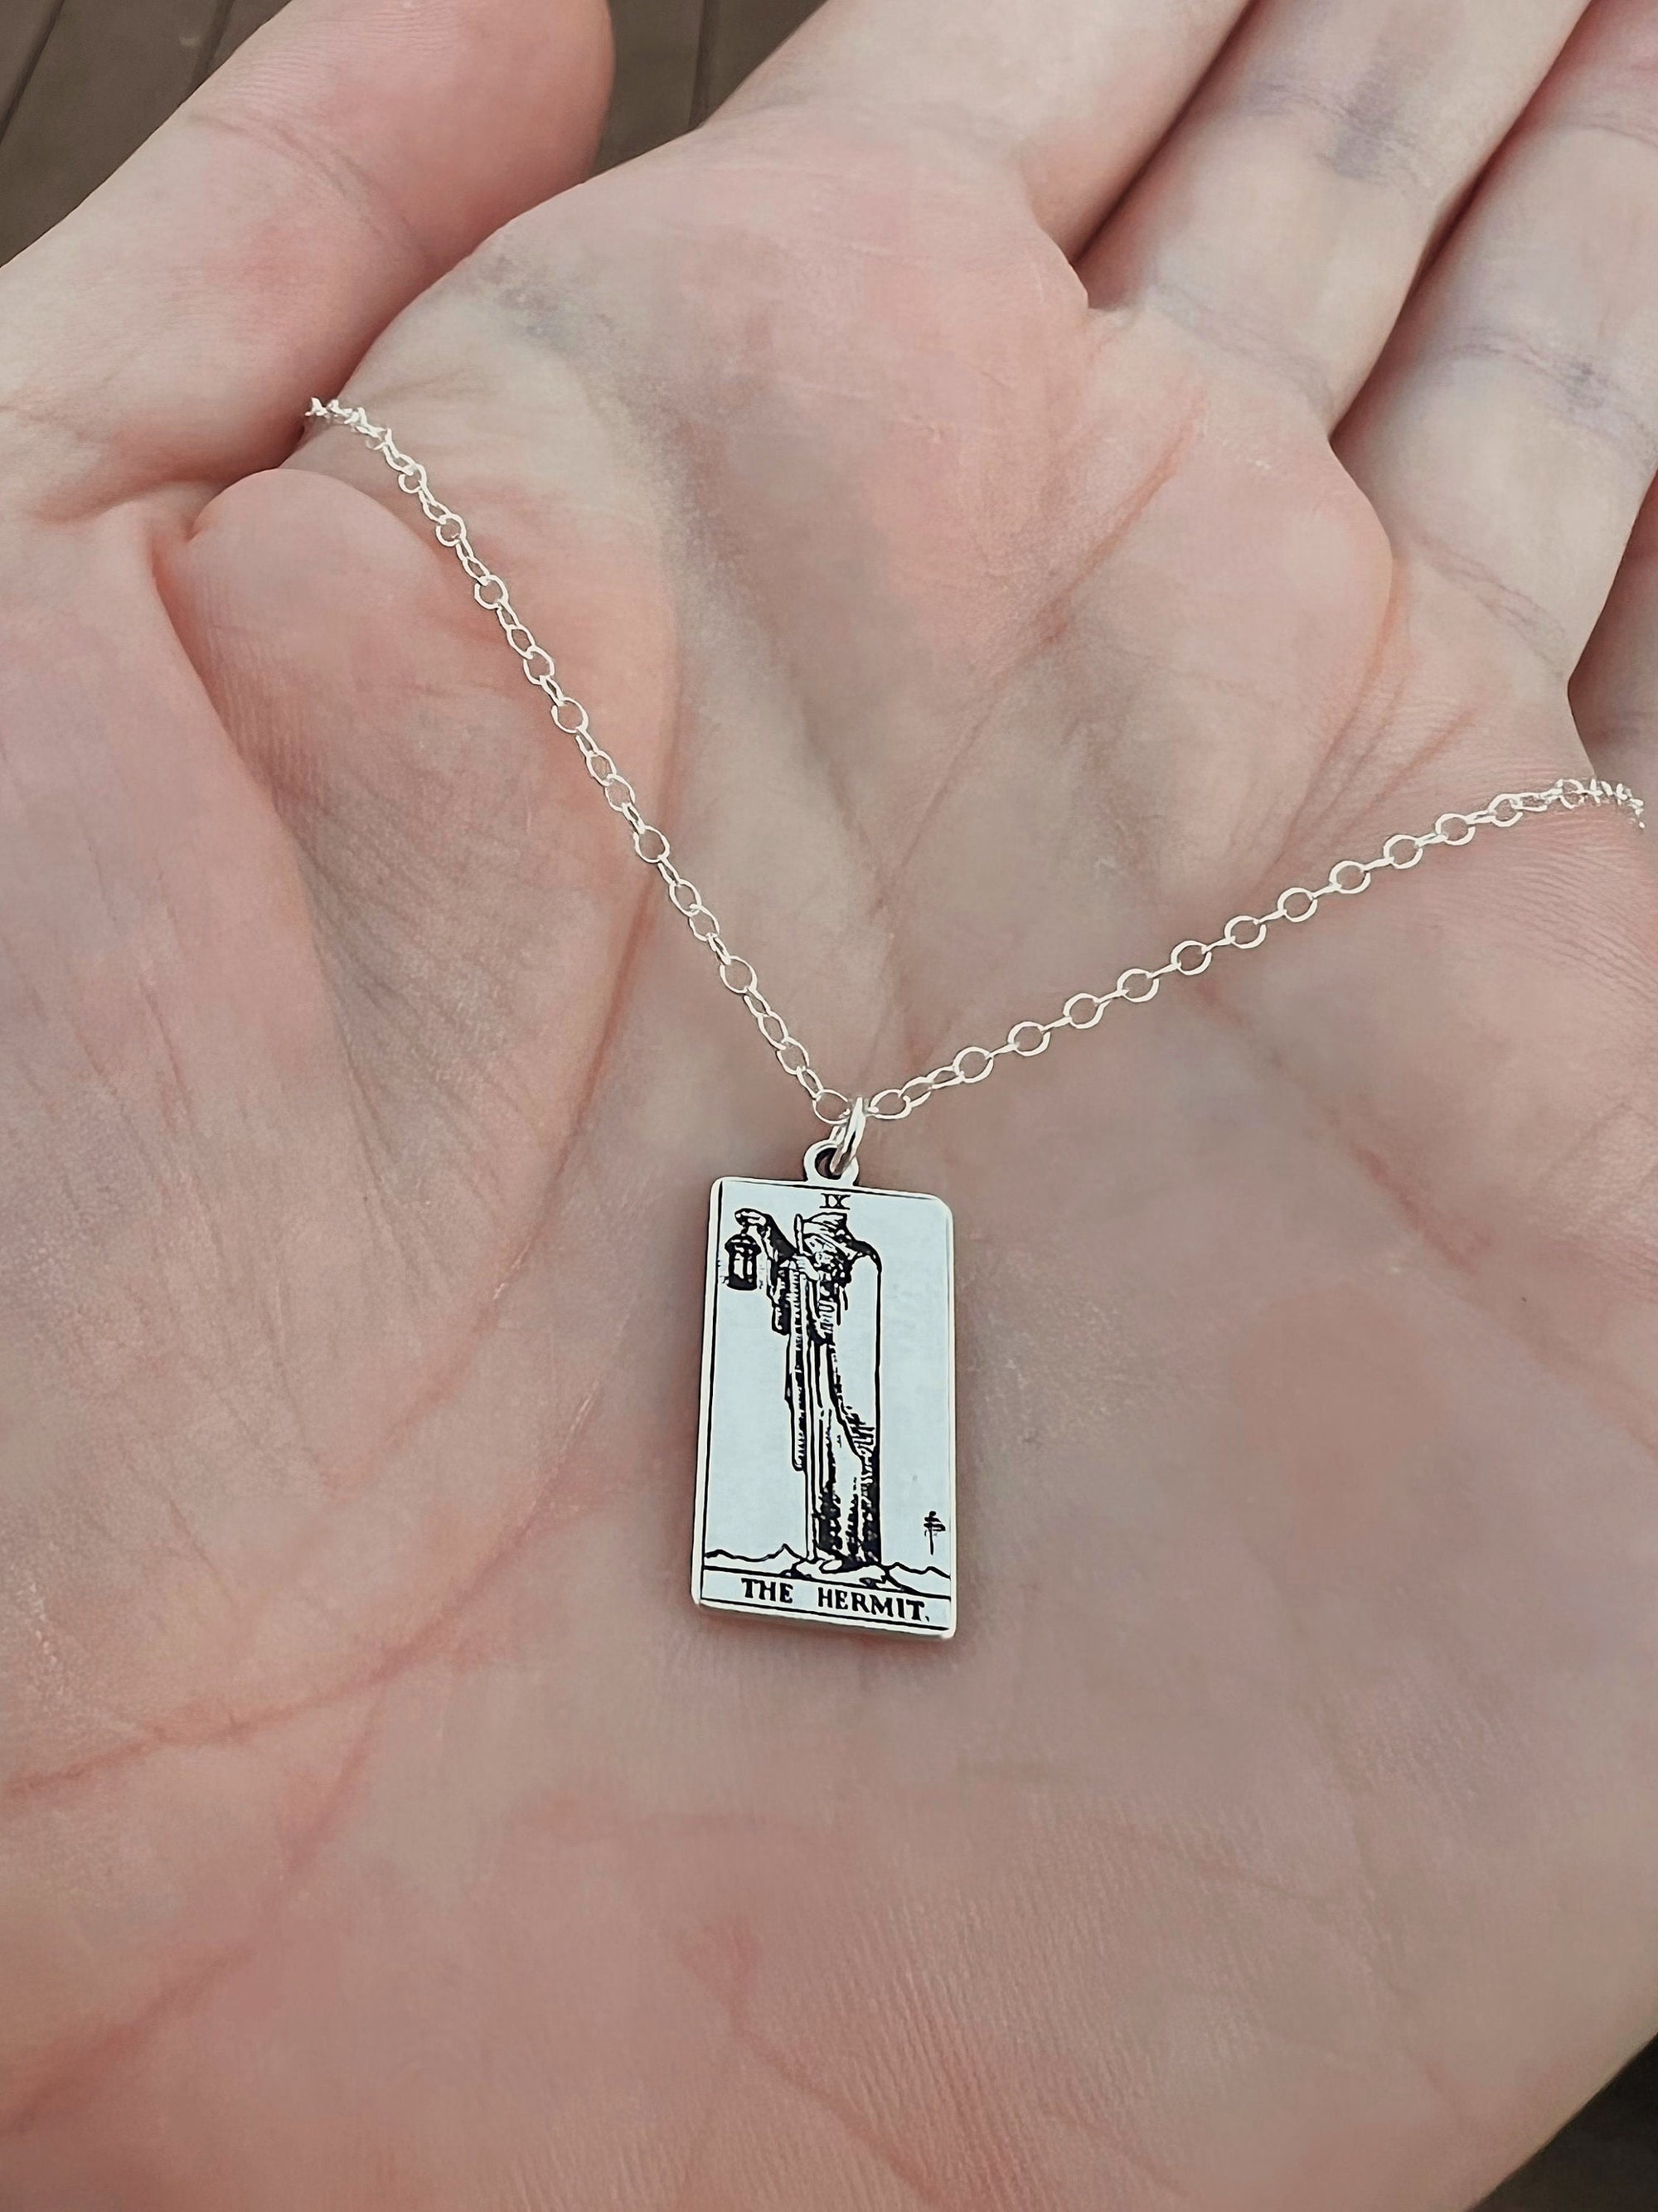 The Hermit Tarot Card Necklace - Sterling Silver